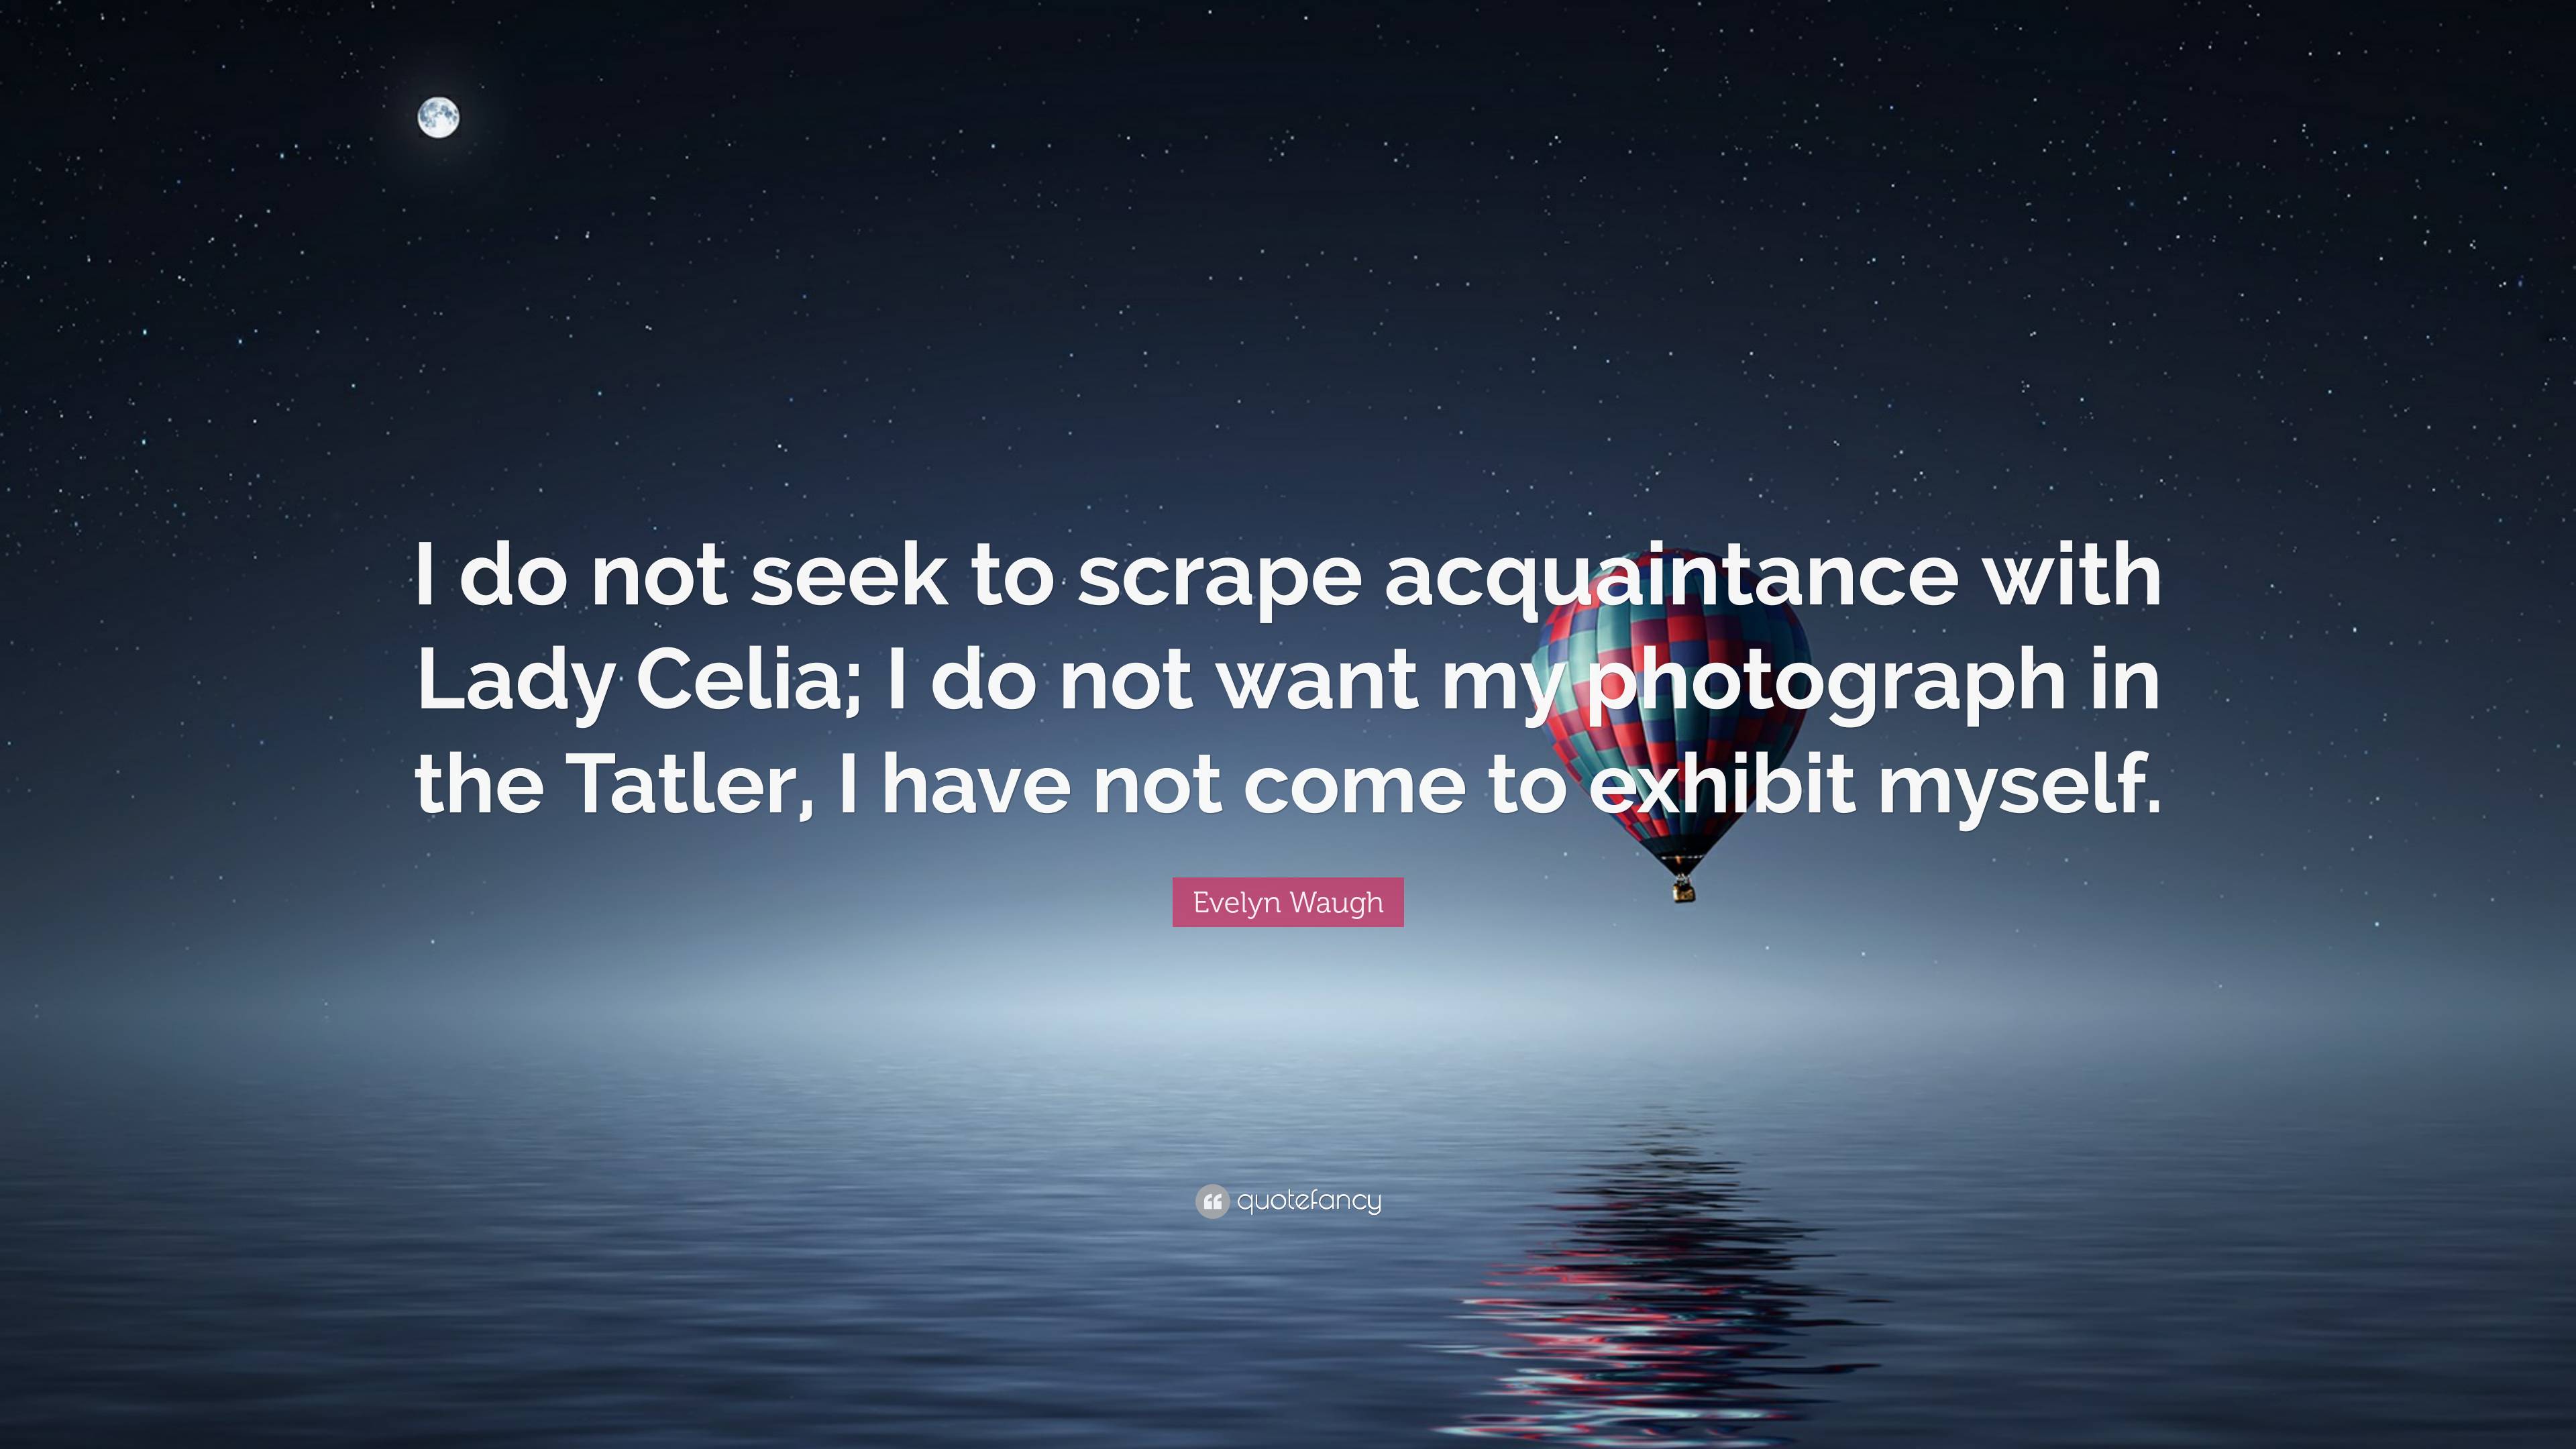 Evelyn Waugh Quote: “I do not seek to scrape acquaintance with Lady ...